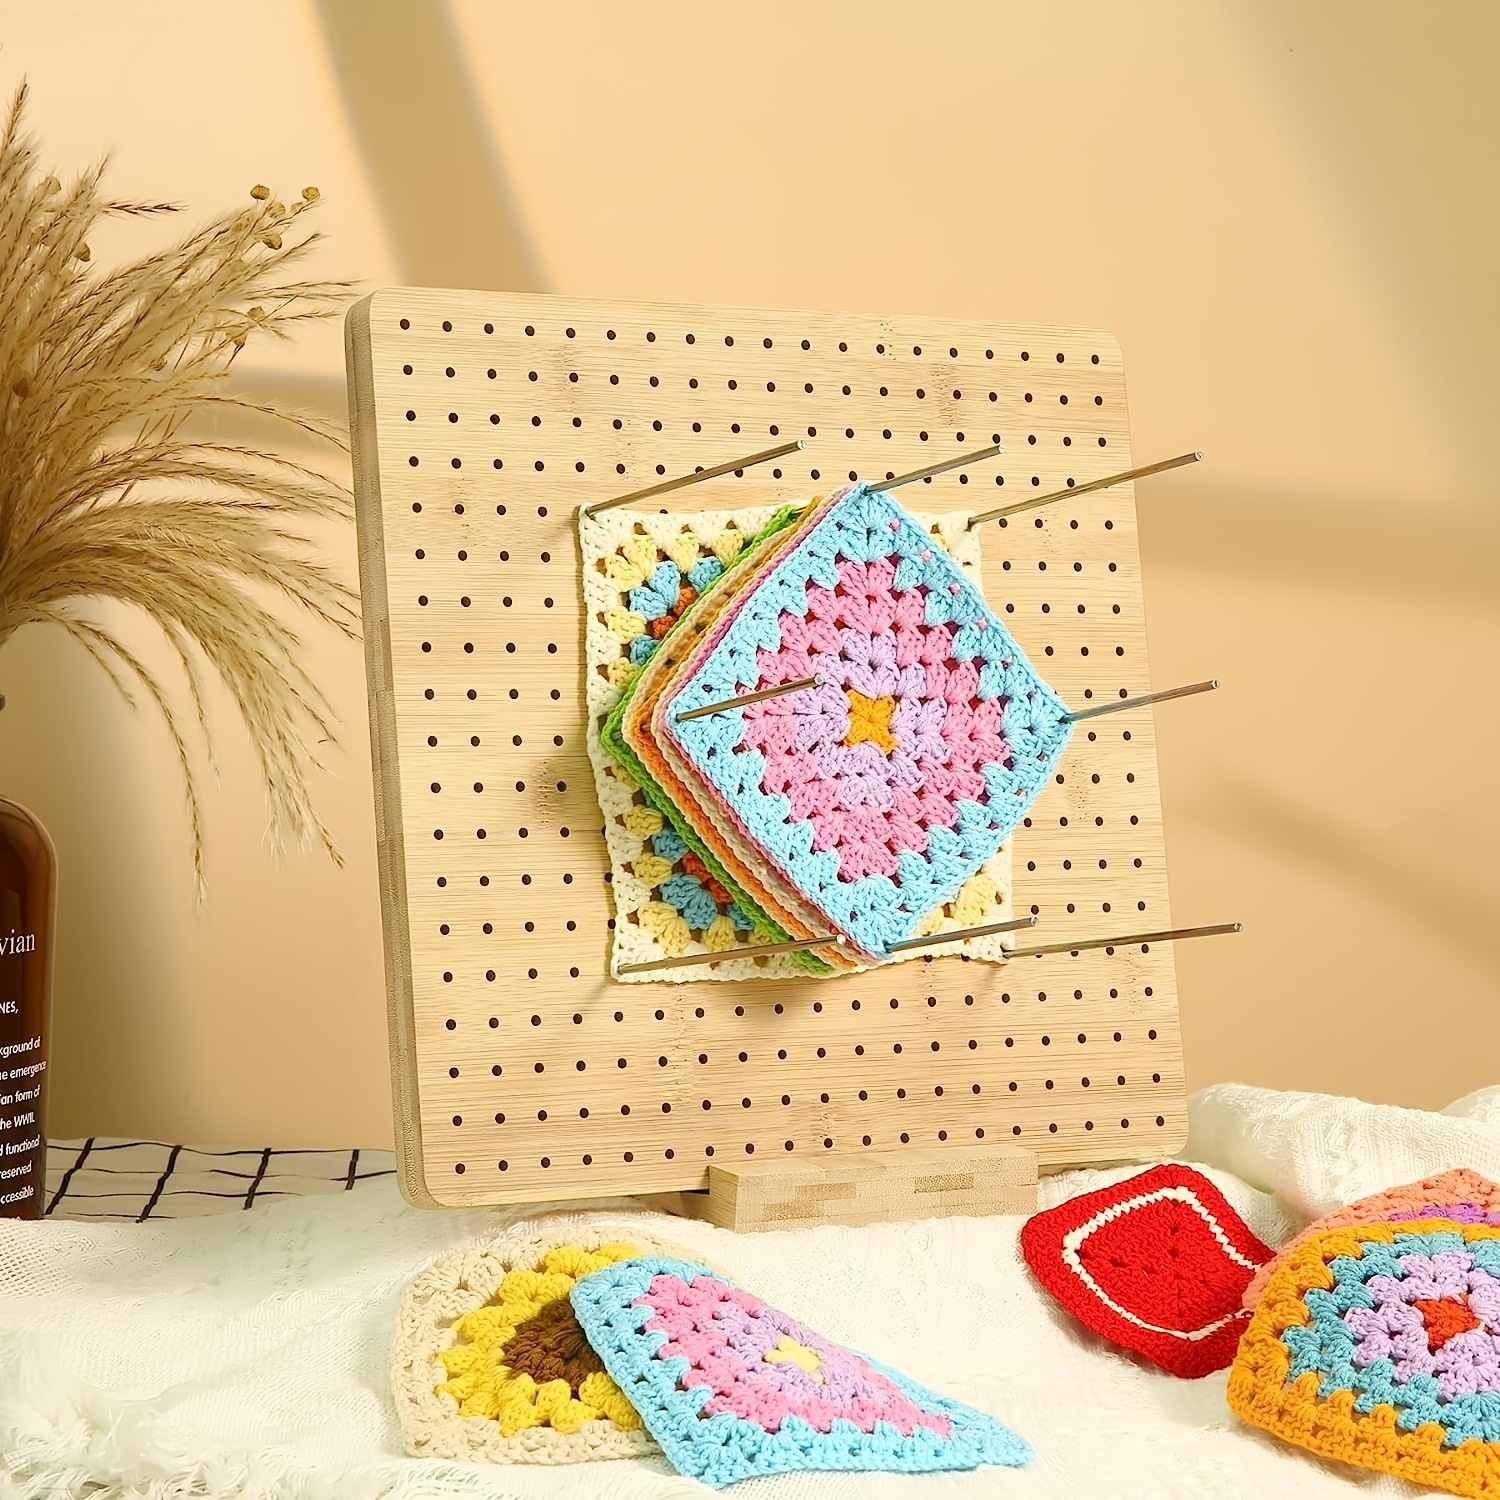 11.8 Inches Blocking Board For Crocheting - Handcrafted Rubber Wooden Board  For Knitting Crochet And Granny Squares, Crochet Accessories Crochet Block